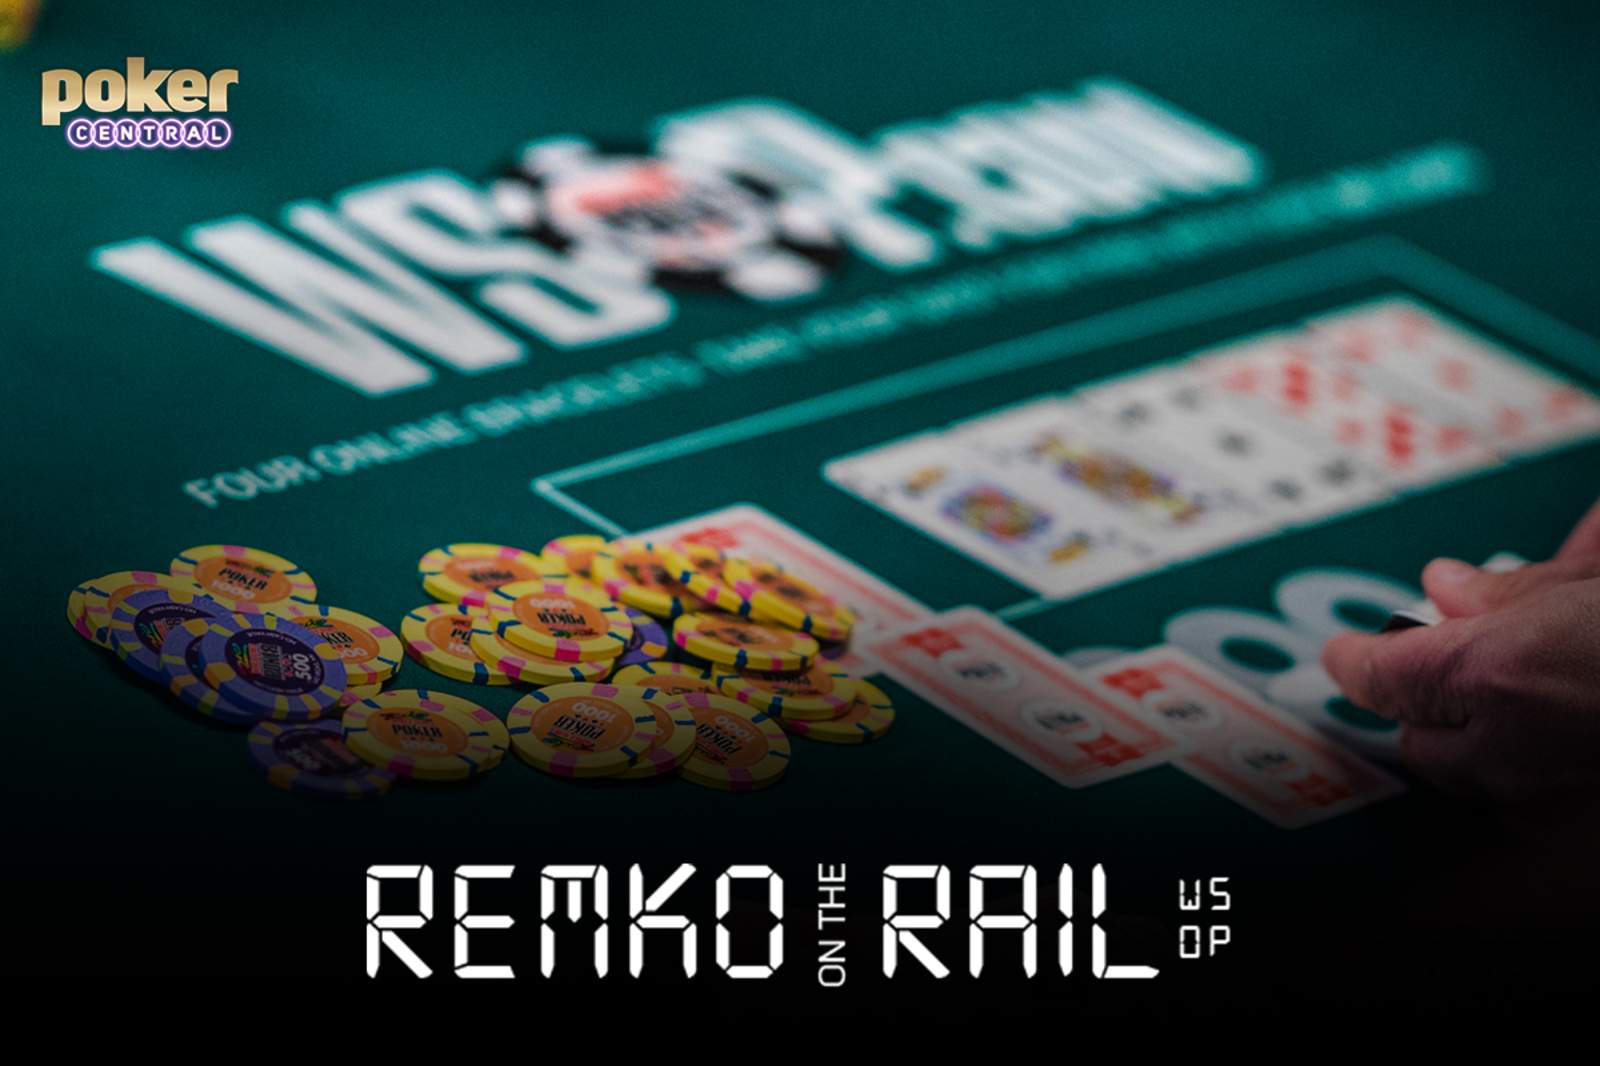 Remko on the Rail: Who's That Winner?